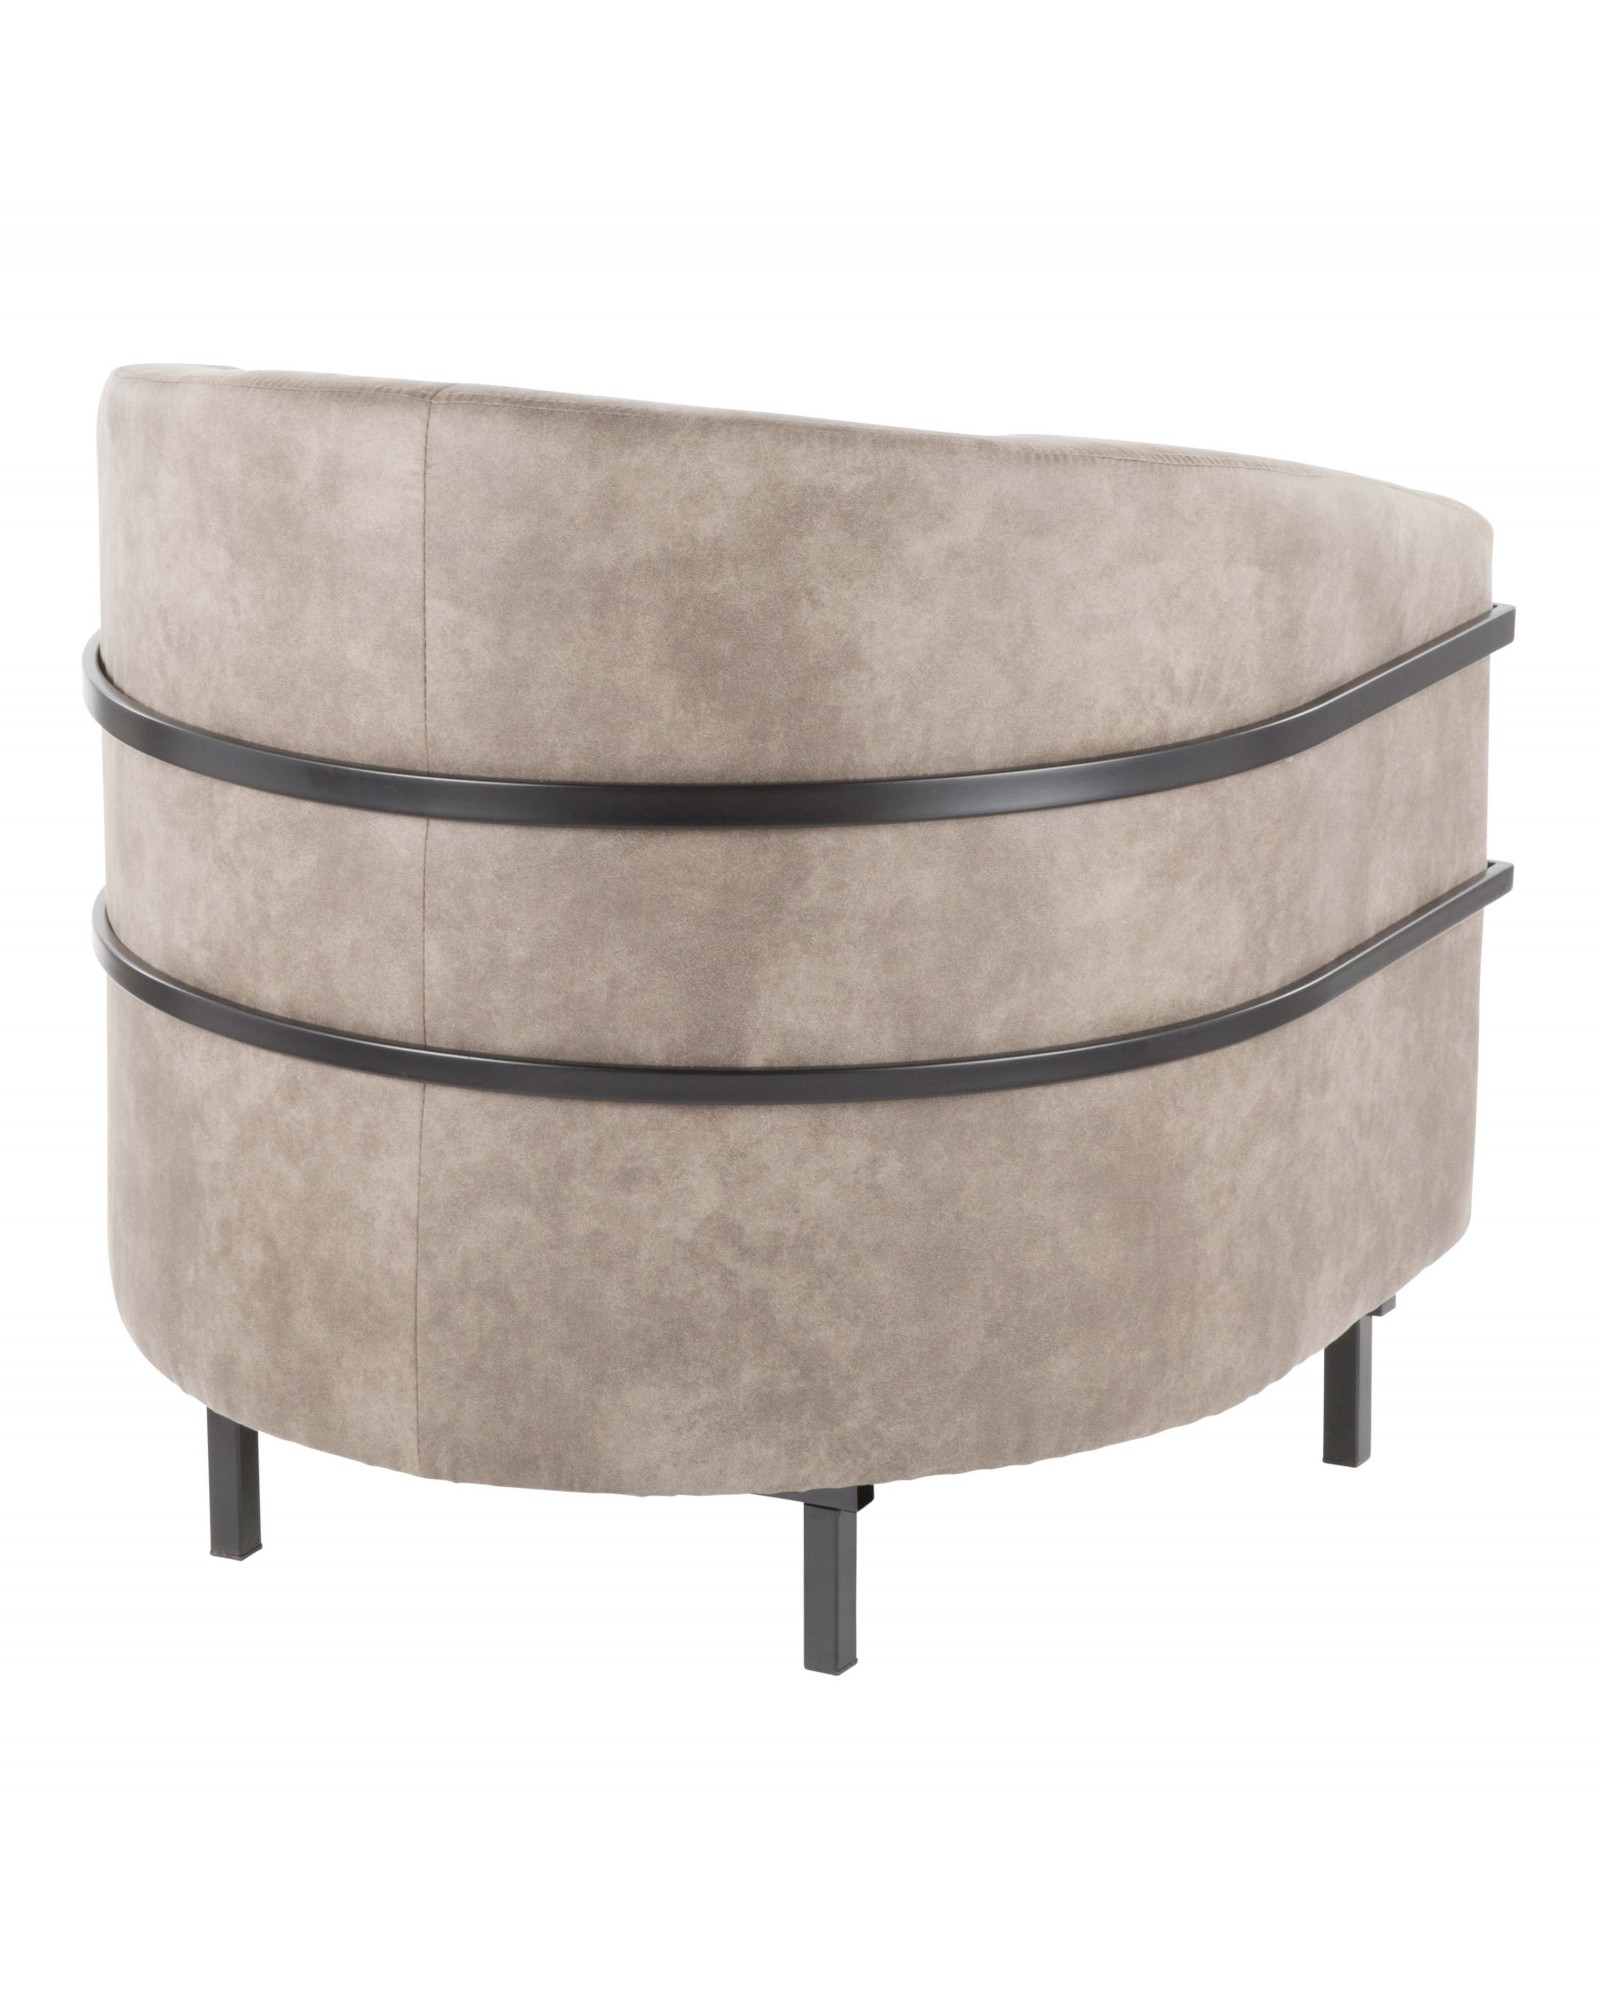 Colby Industrial Tub Chair in Black with Stone Cowboy Fabric